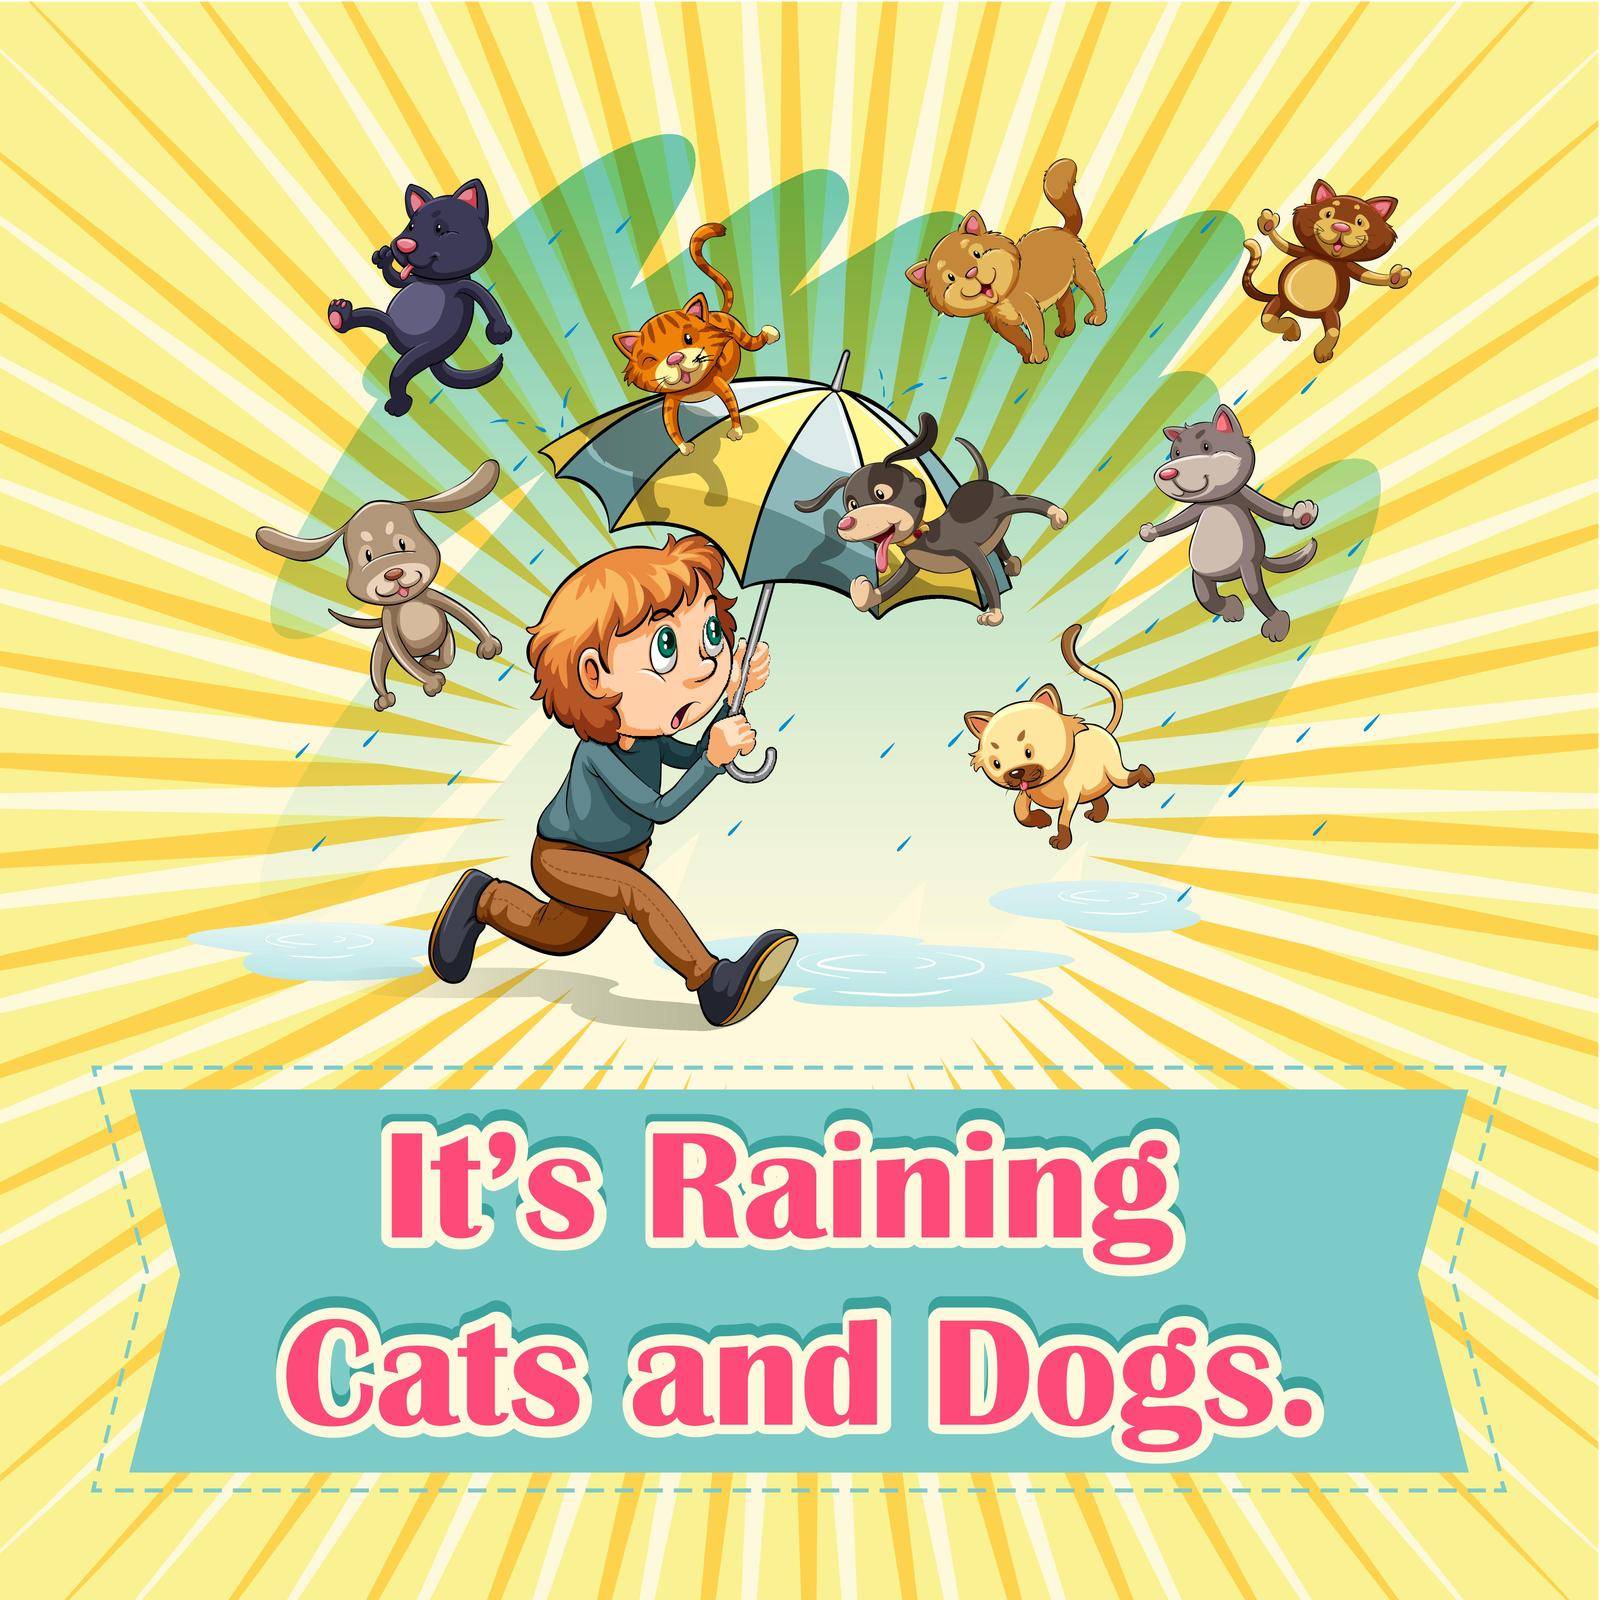 Raining cats and dogs by iimages